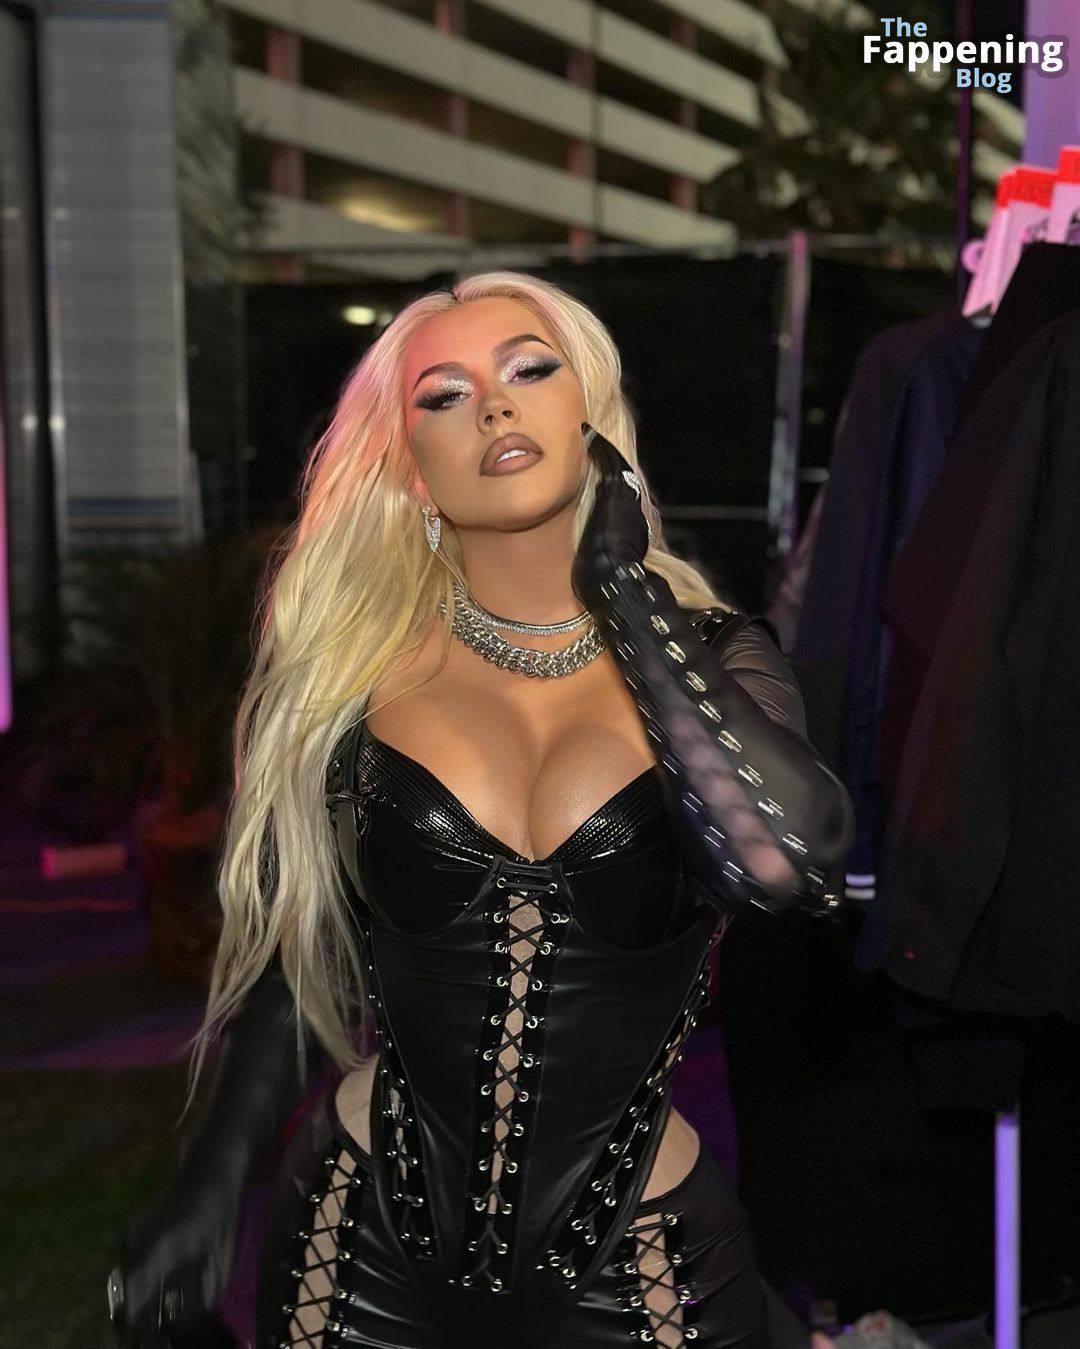 Christina Aguilera Rocks Her Black Leather Outfit (10 Photos)